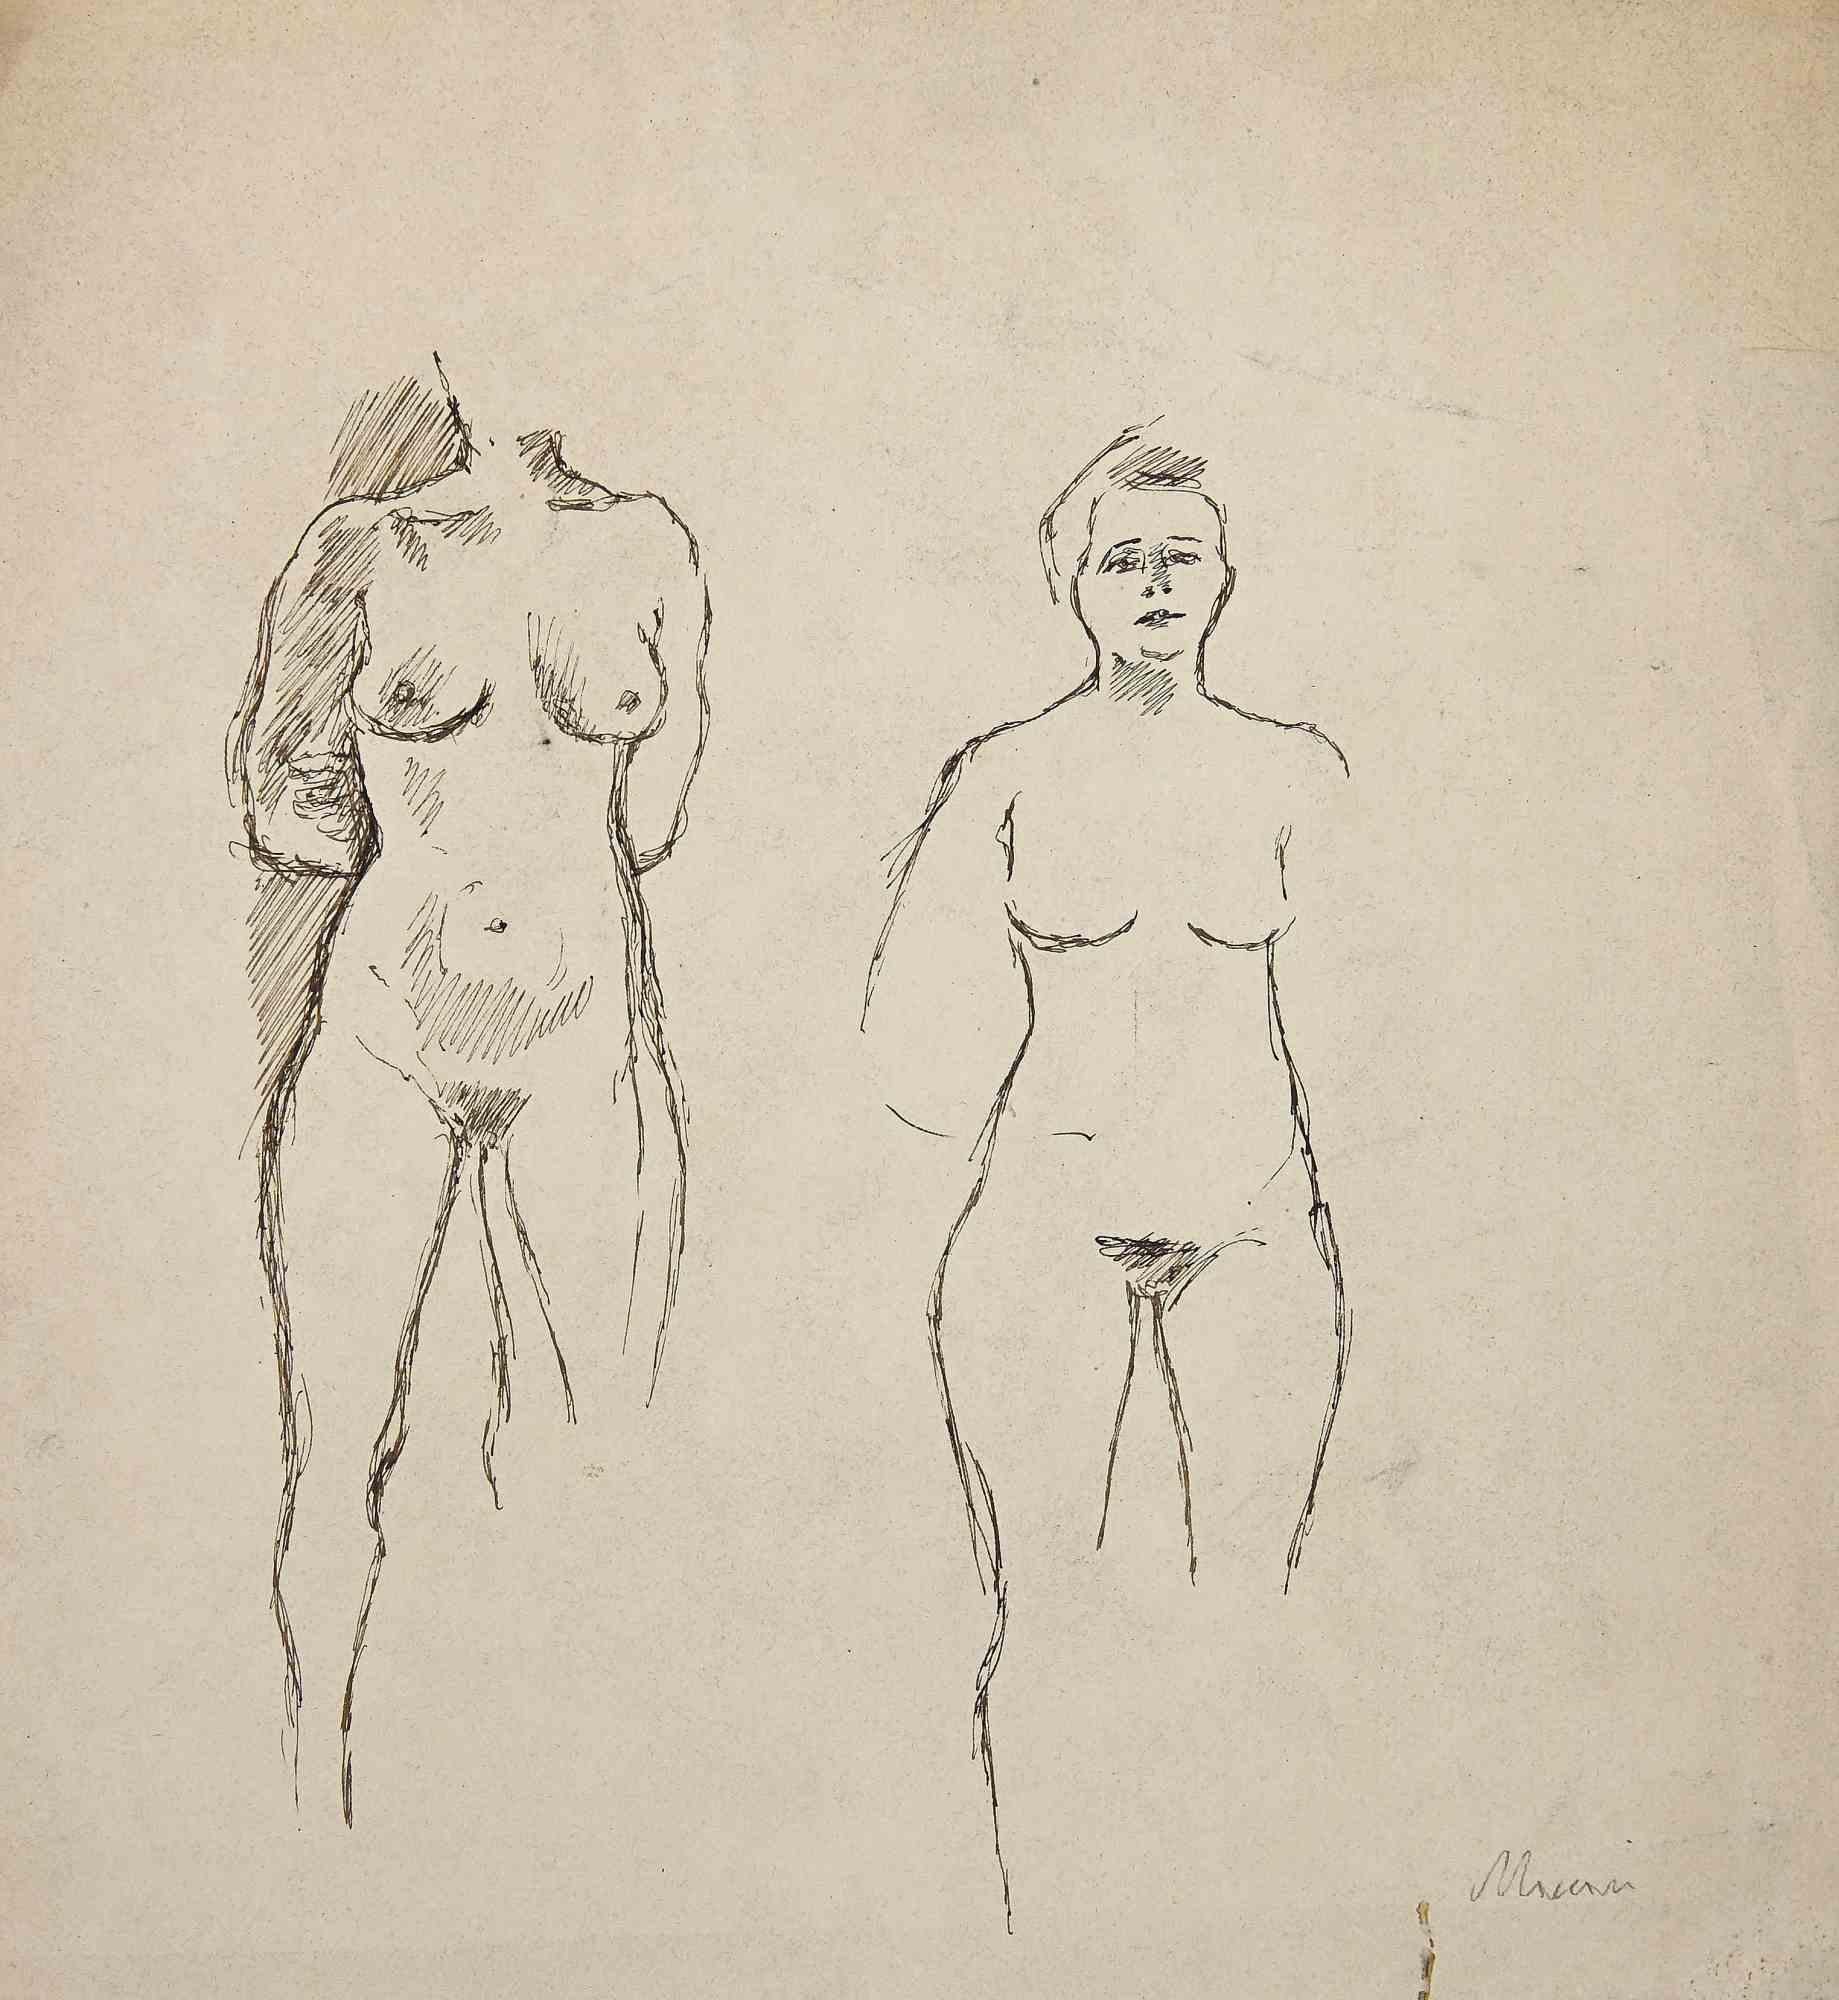 Nudes is an original China Ink Drawing realized by Mino Maccari in mid-20th Century.

Good condition on a yellowed paper.

Hand-signed by the artist with pencil.

Mino Maccari (1898-1989) was an Italian writer, painter, engraver and journalist,